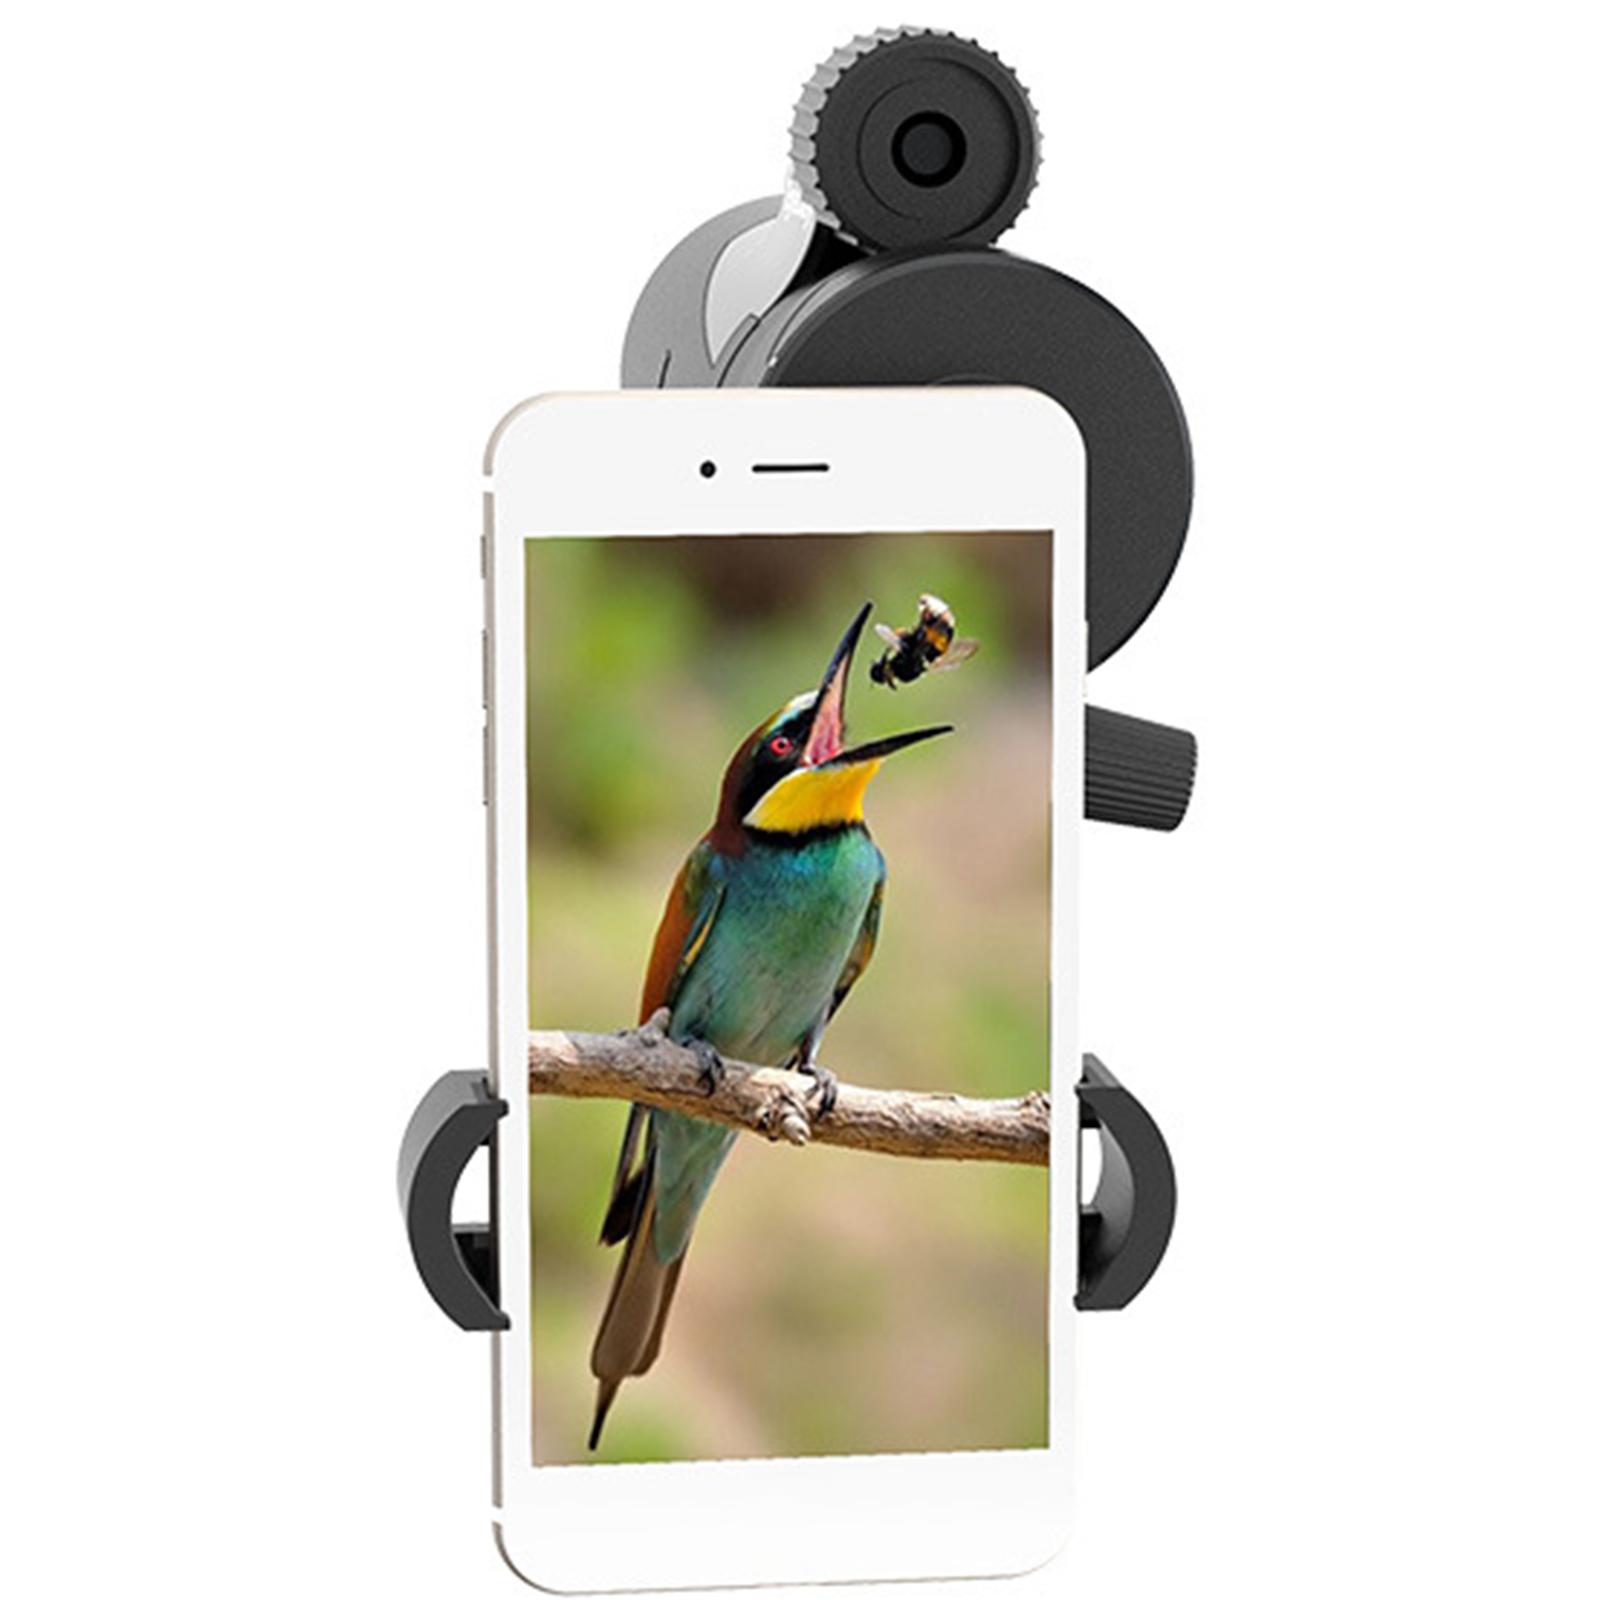 Universal Telescopes Cell Phone Adapter Mount Adjustable Compact Easy to Use